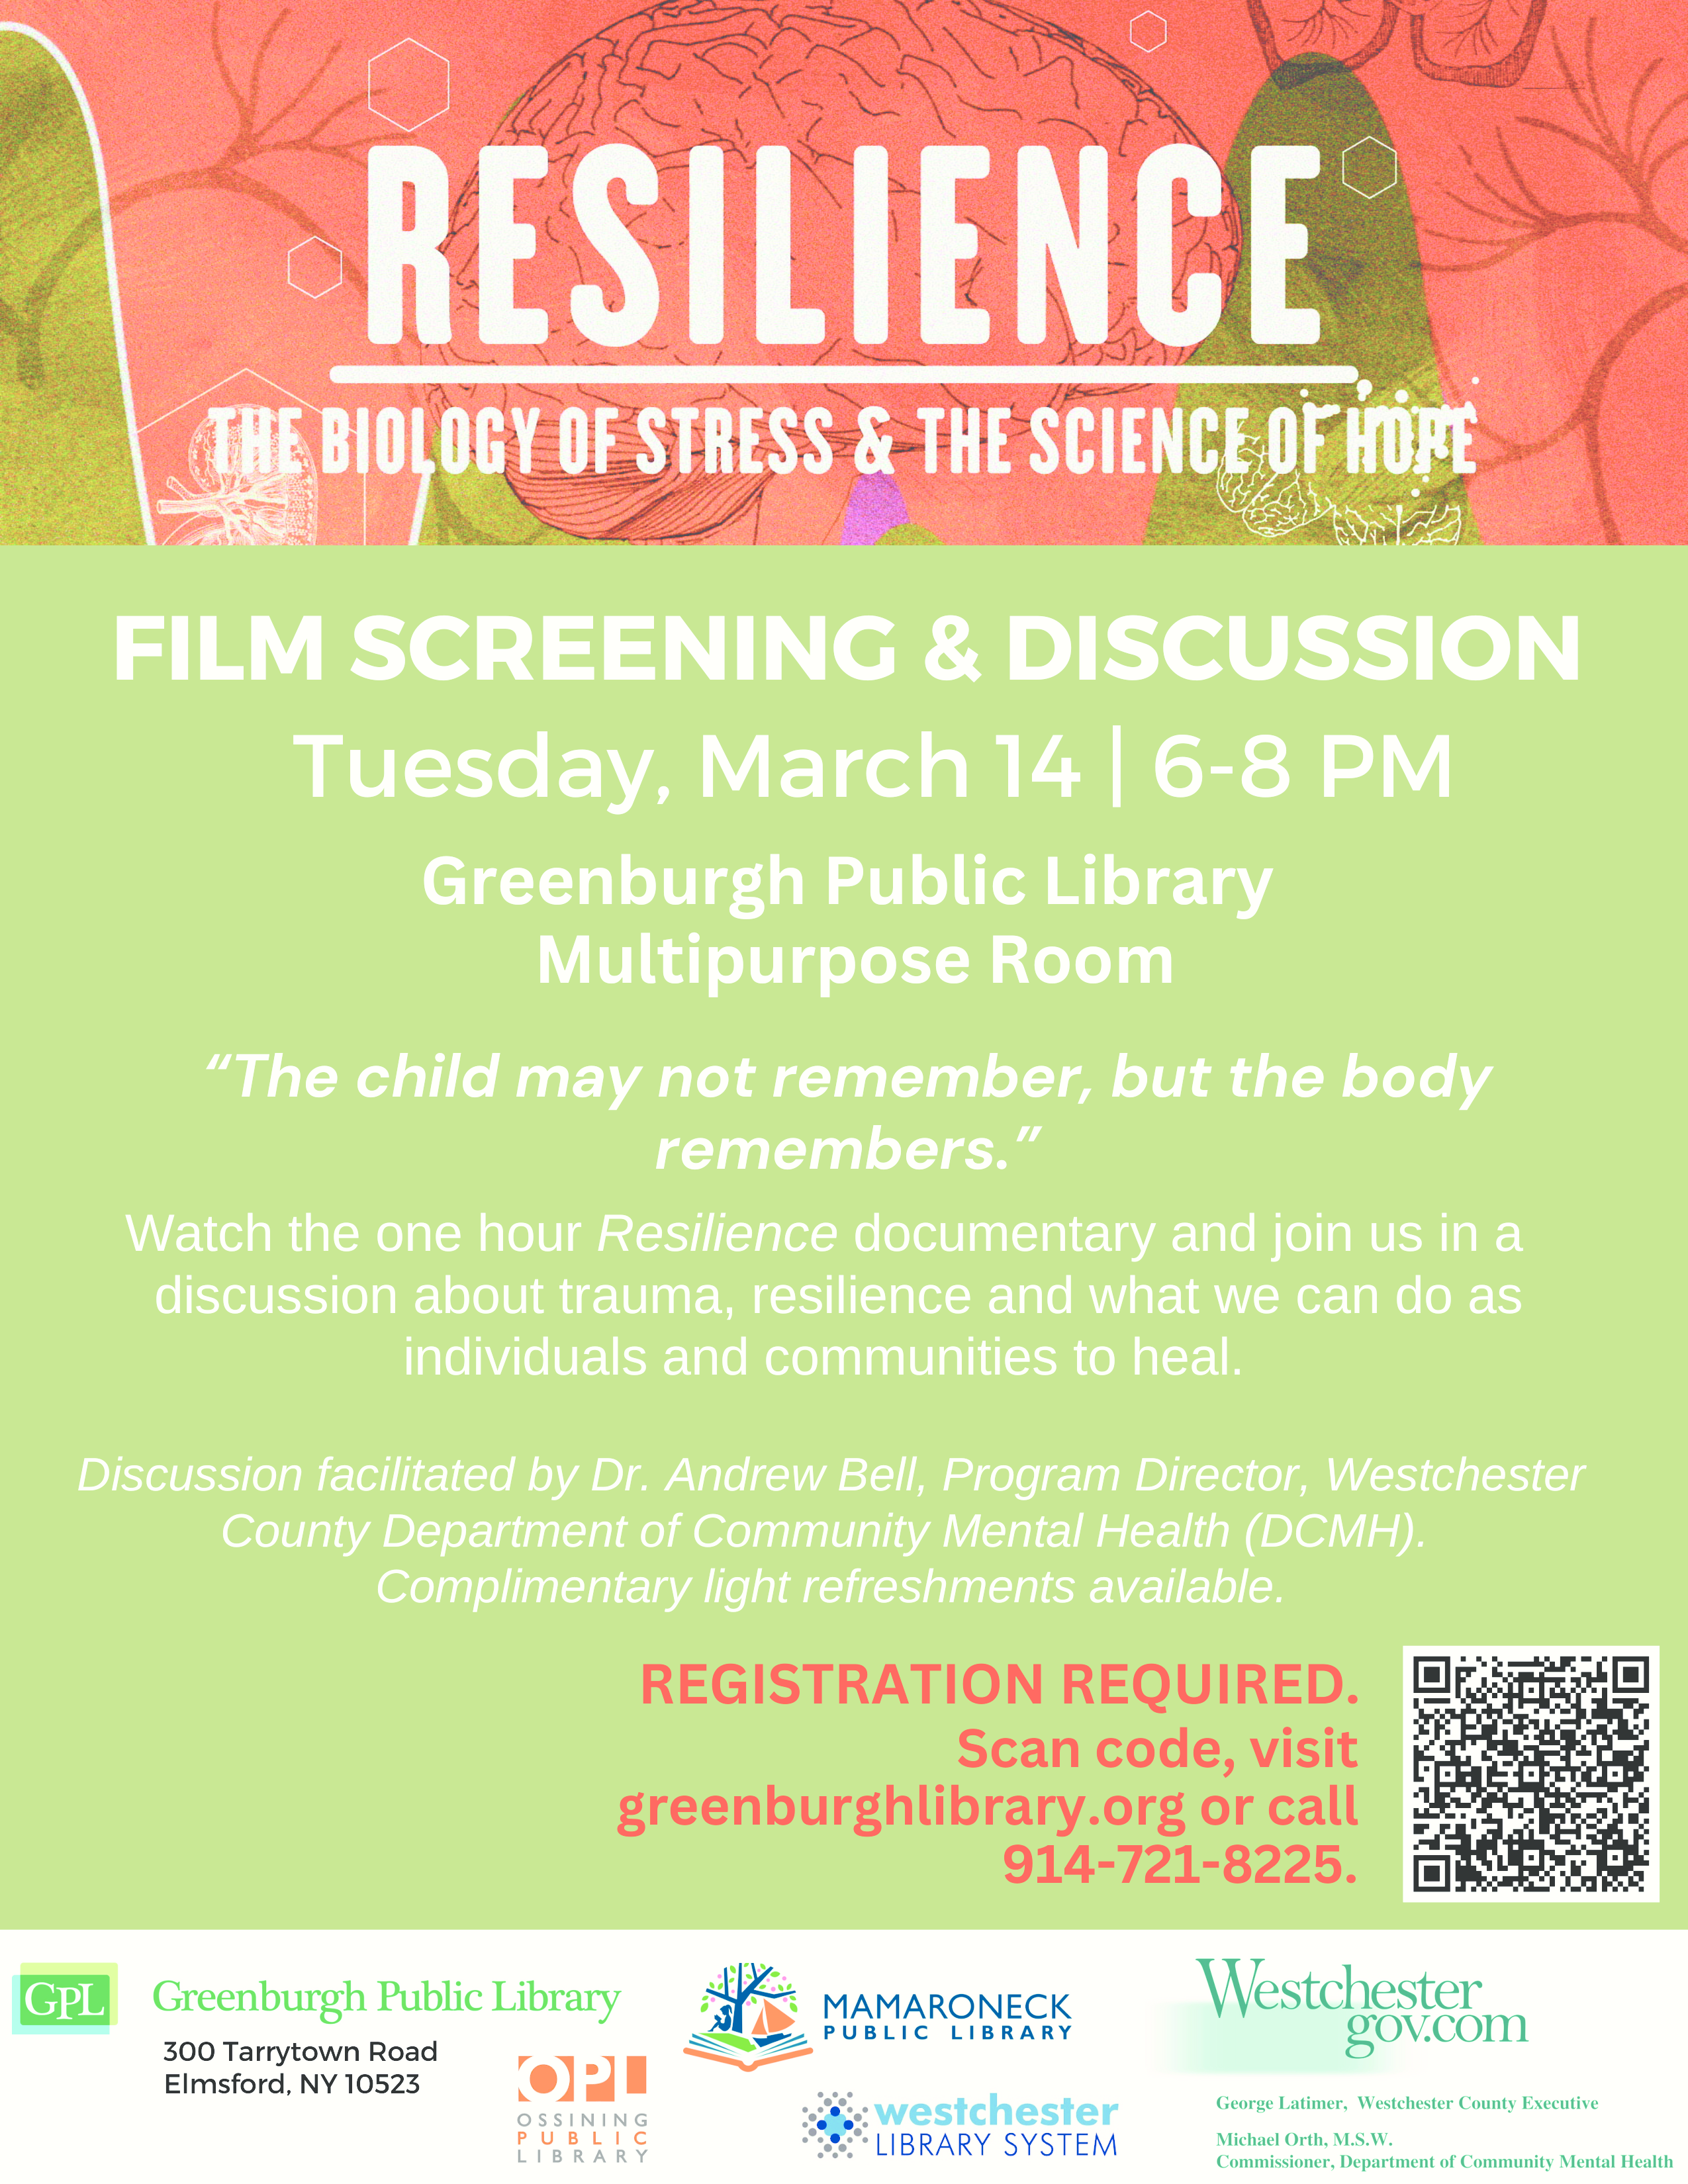 3/14 @ 6-8 pm film: Resilience at Greenburgh Public Library